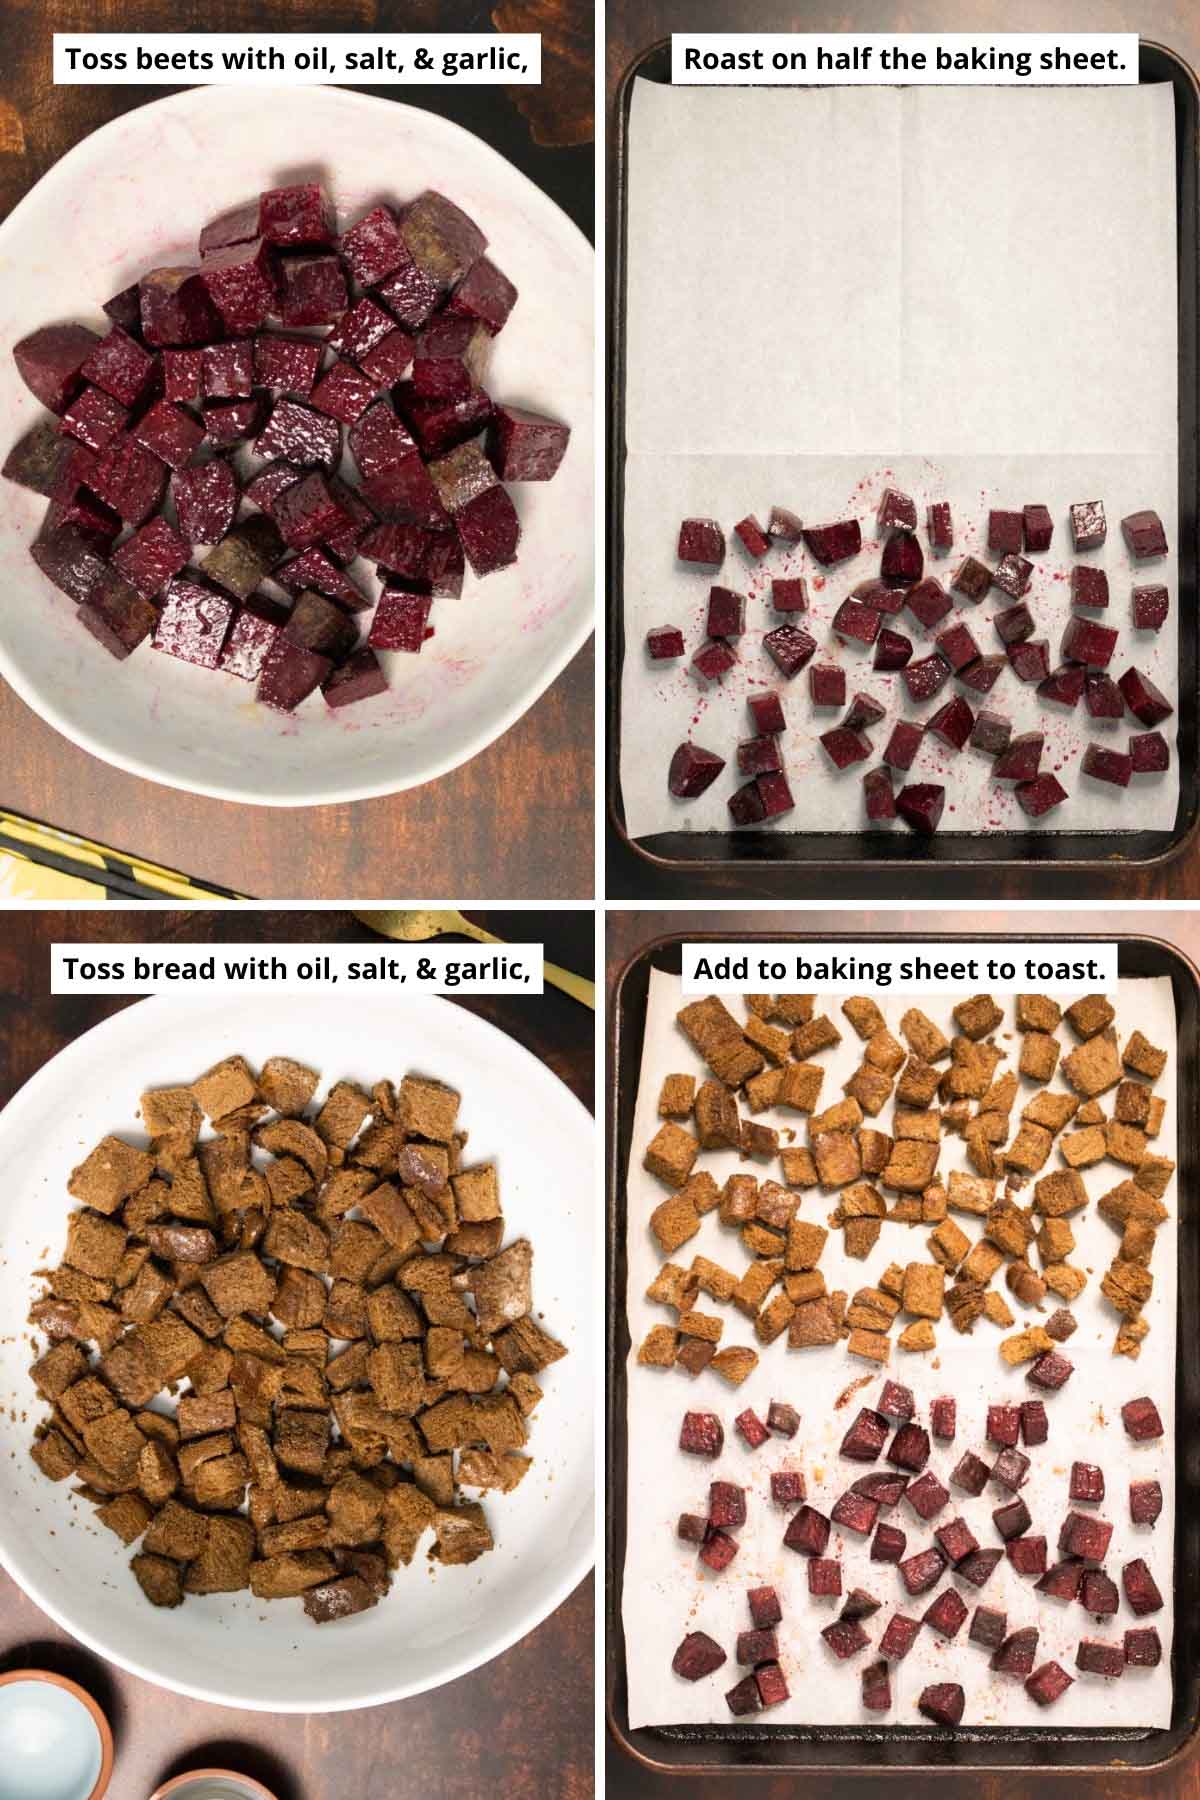 image collage showing roasting the beets on half the pan and adding the crouton pieces to the other half to toast